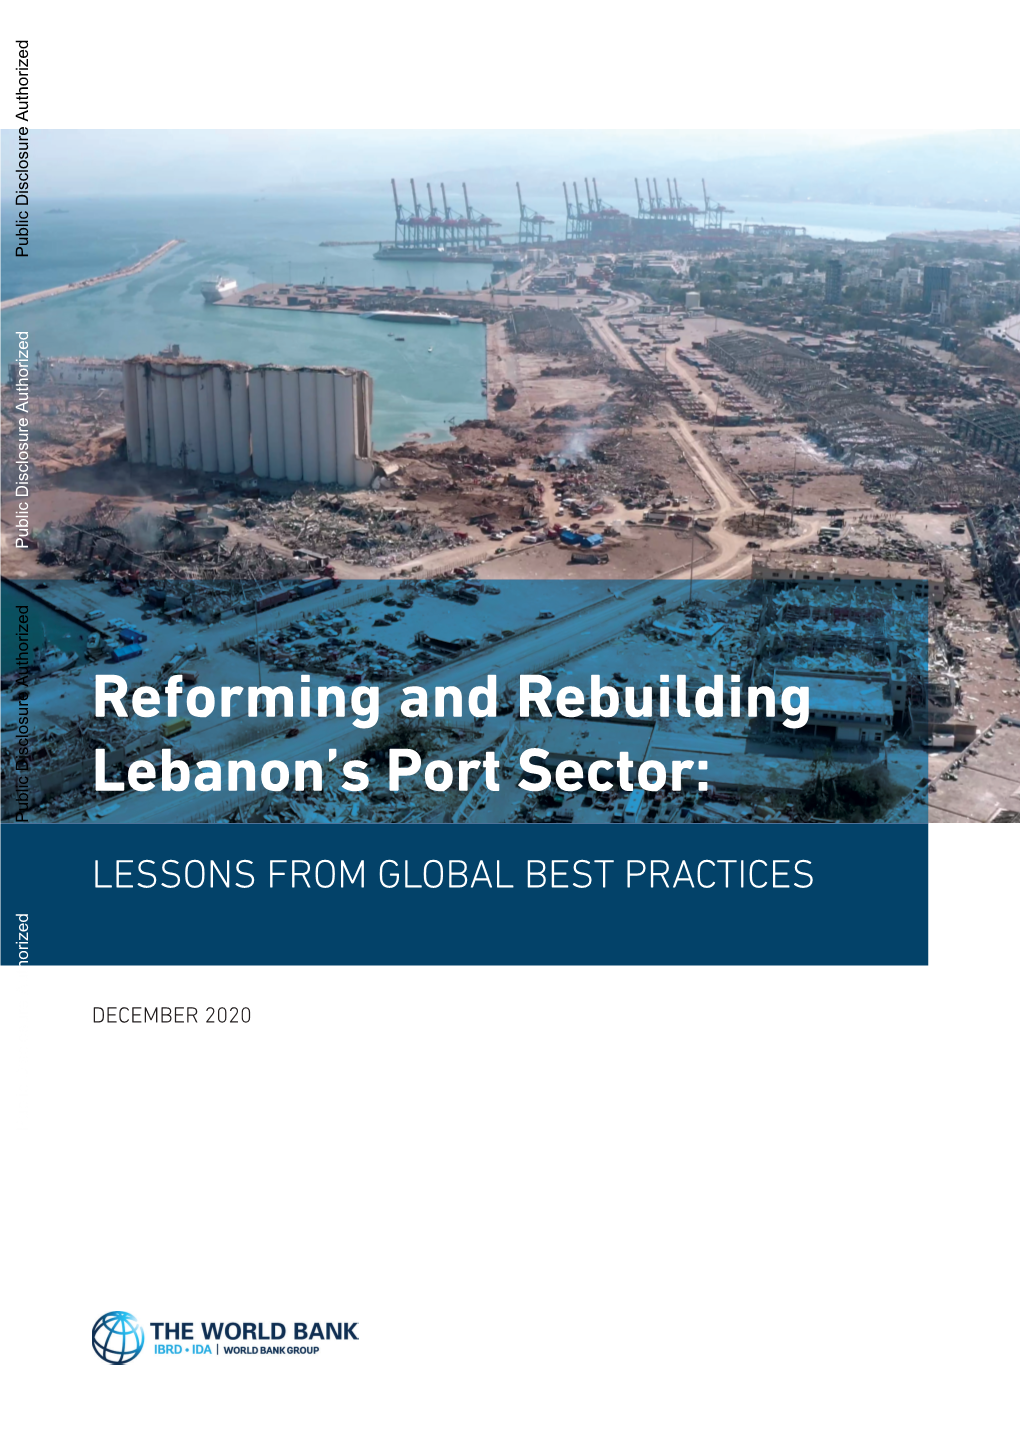 Reforming and Rebuilding Lebanon's Port Sector